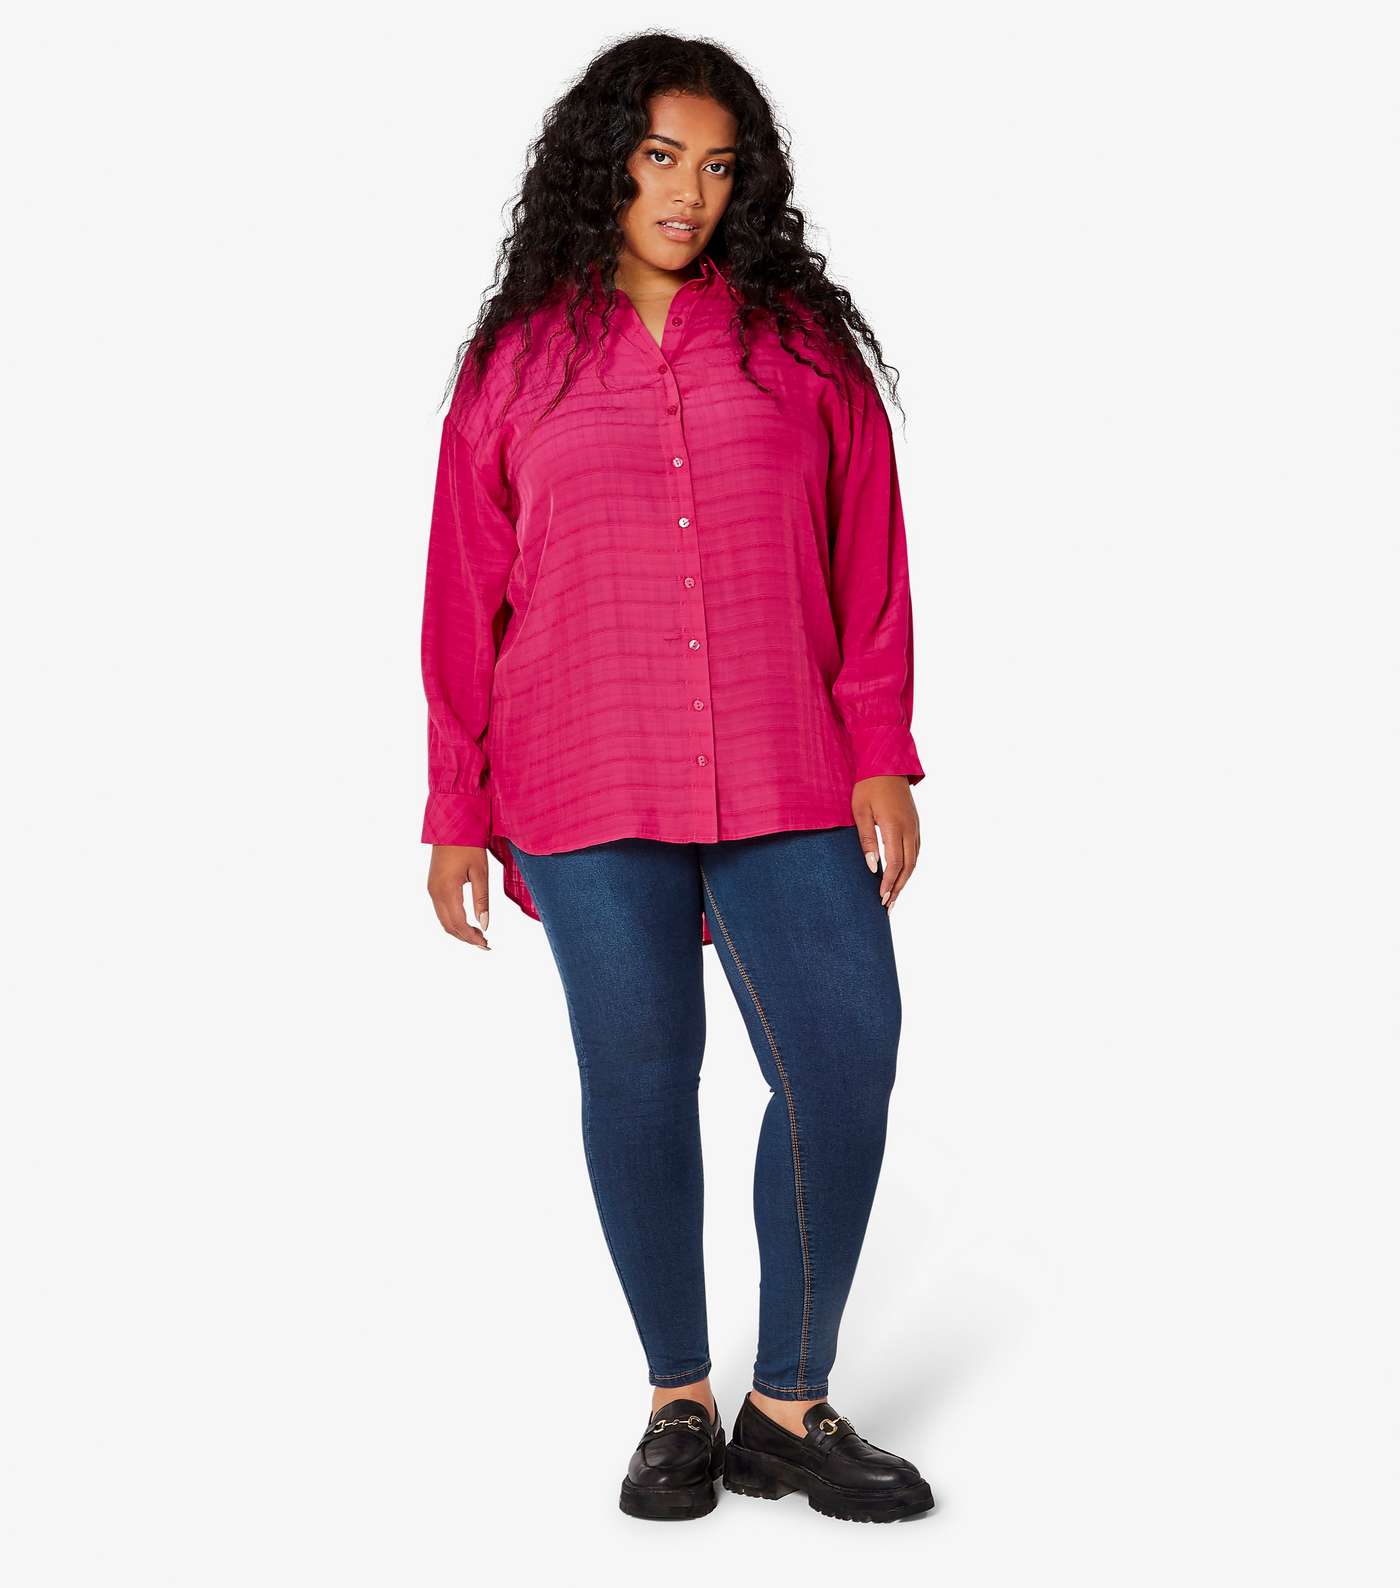 Apricot Curves Bright Pink Check Oversized Shirt Image 2